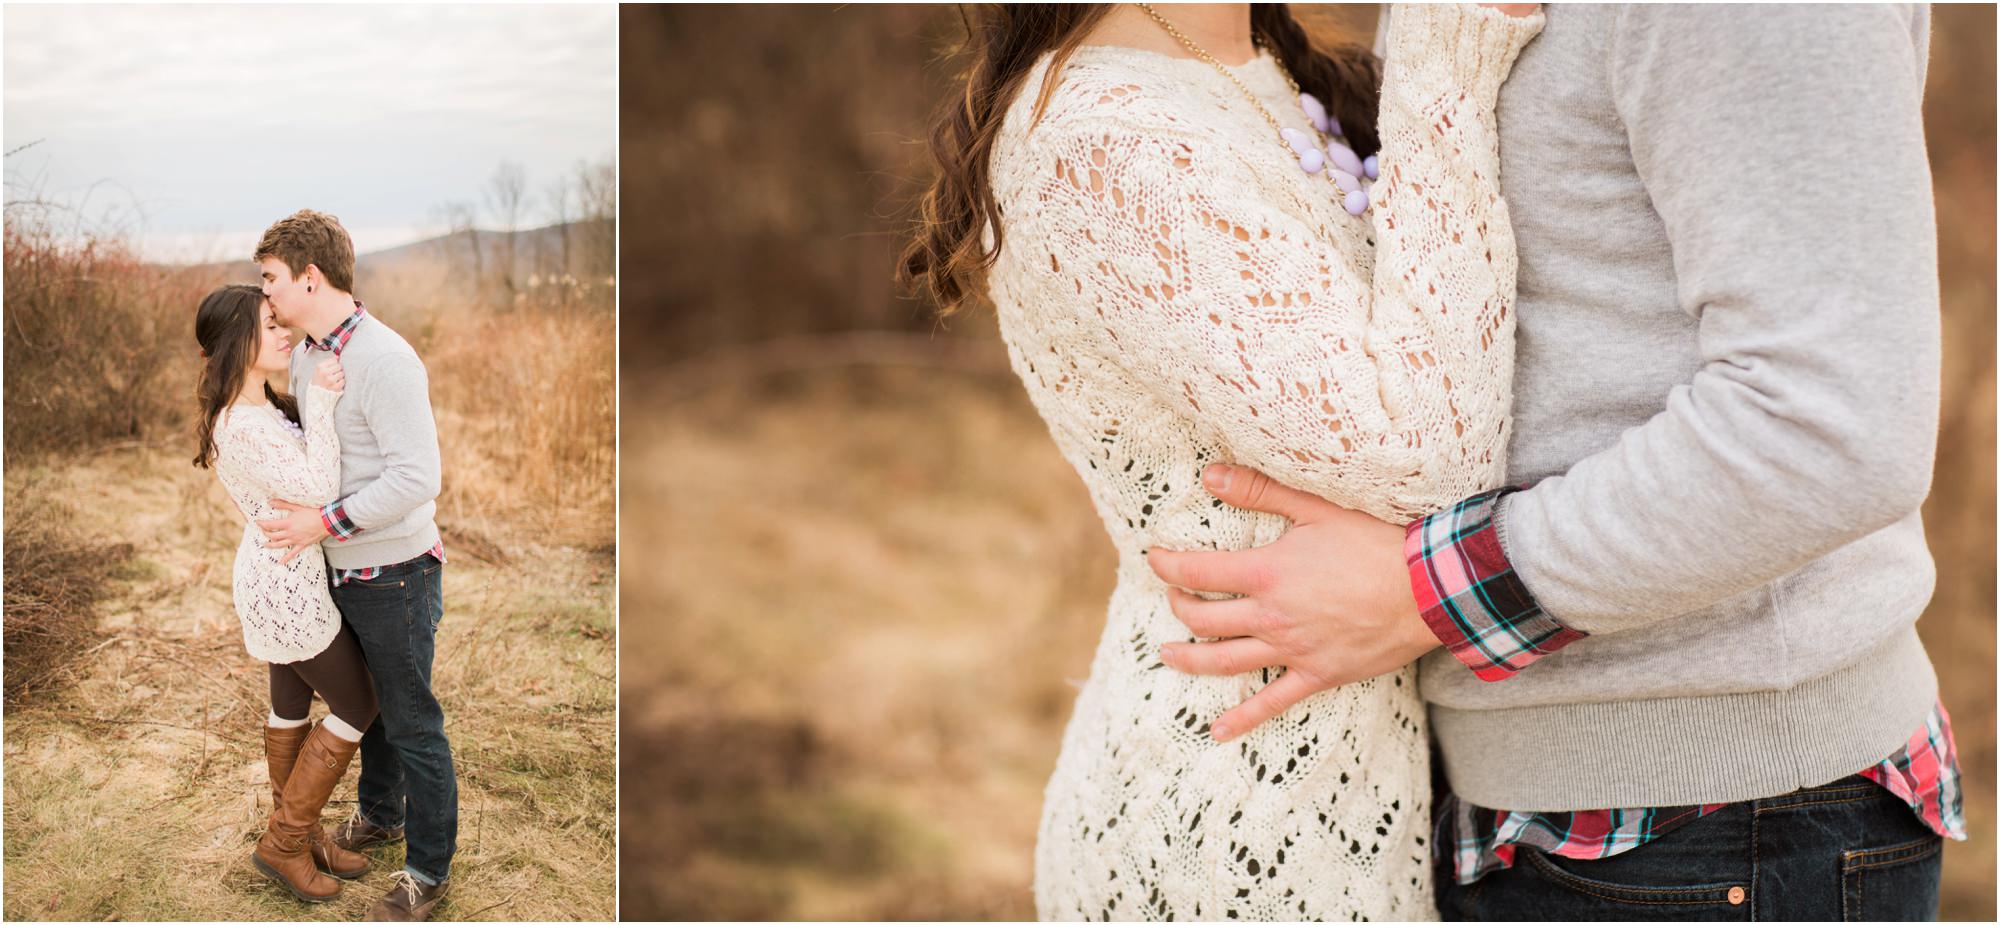 Couple in a field after pillow fight engagement session